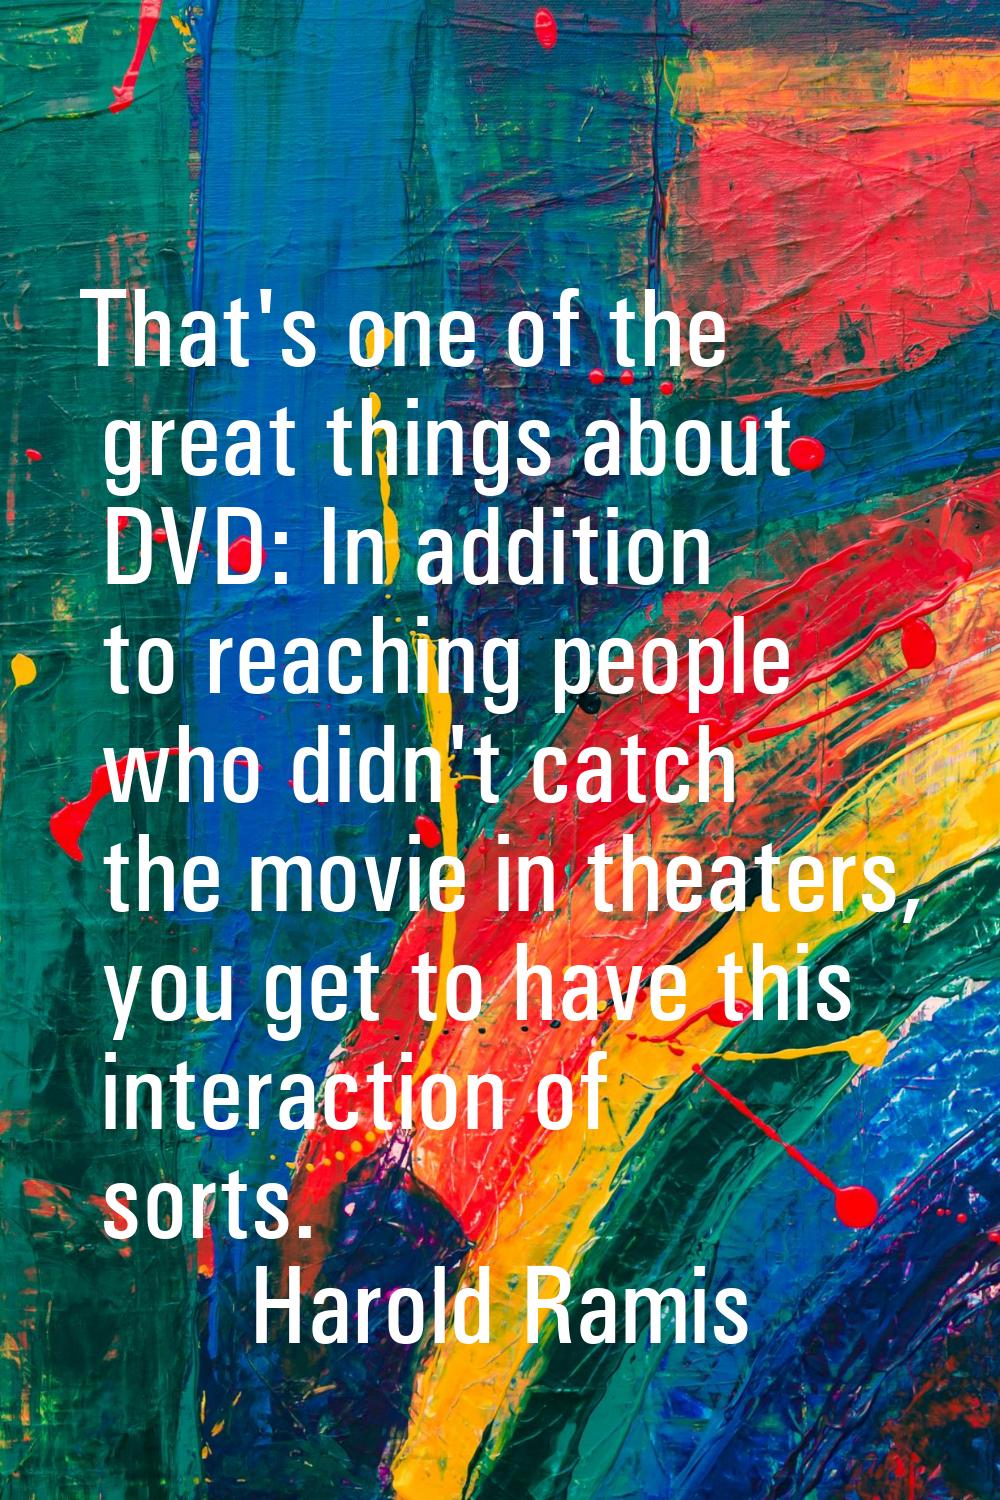 That's one of the great things about DVD: In addition to reaching people who didn't catch the movie